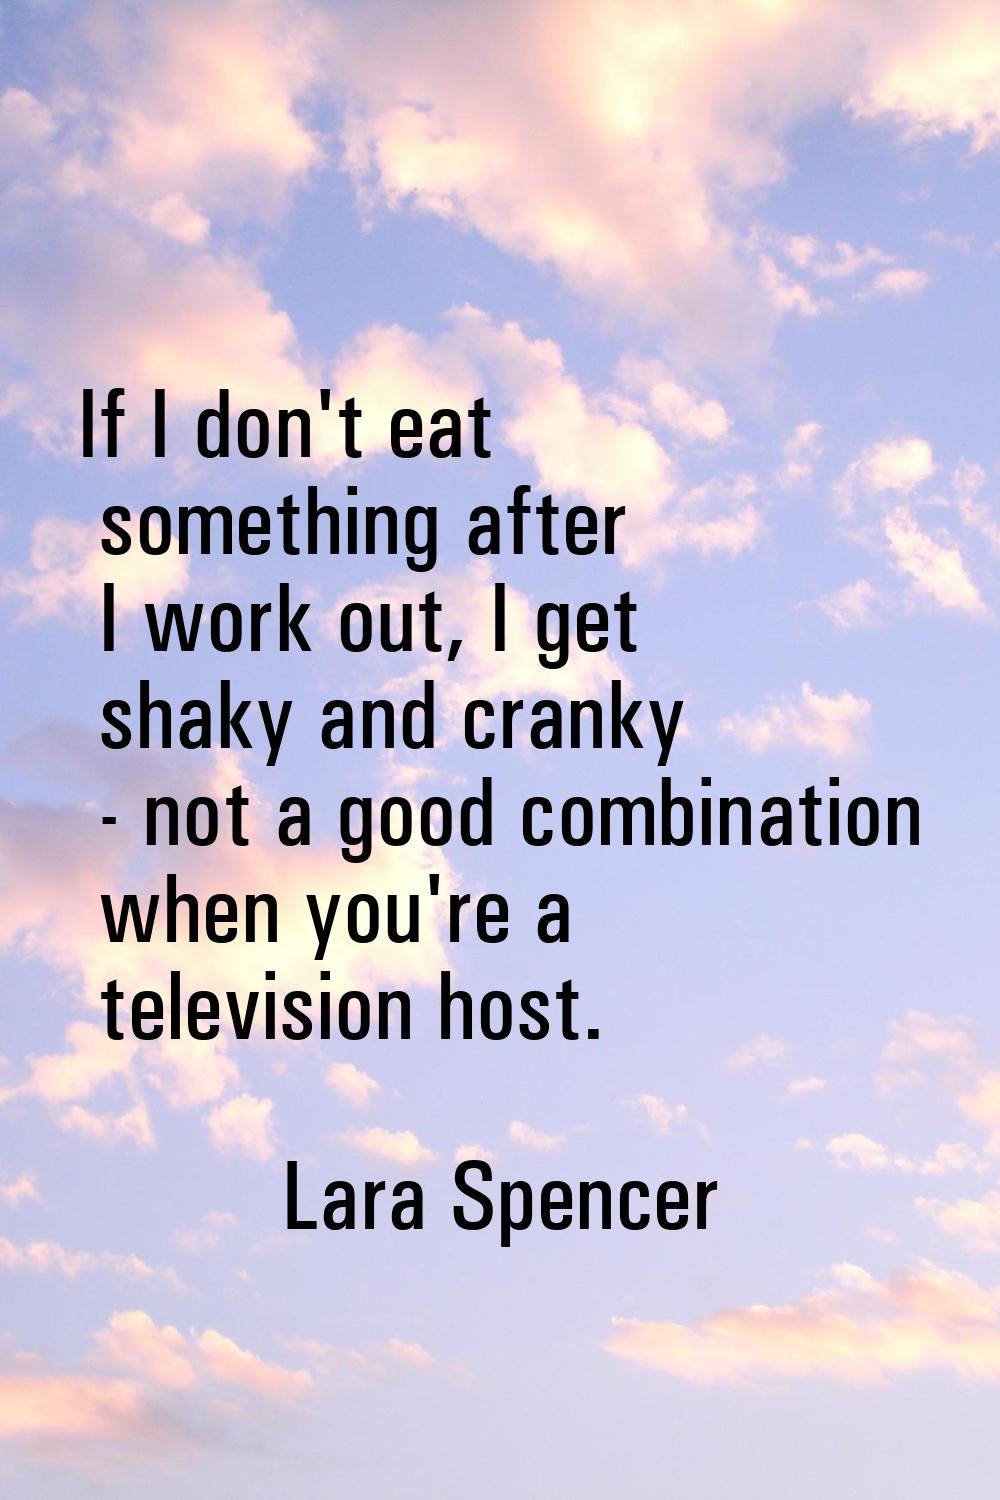 If I don't eat something after I work out, I get shaky and cranky - not a good combination when you